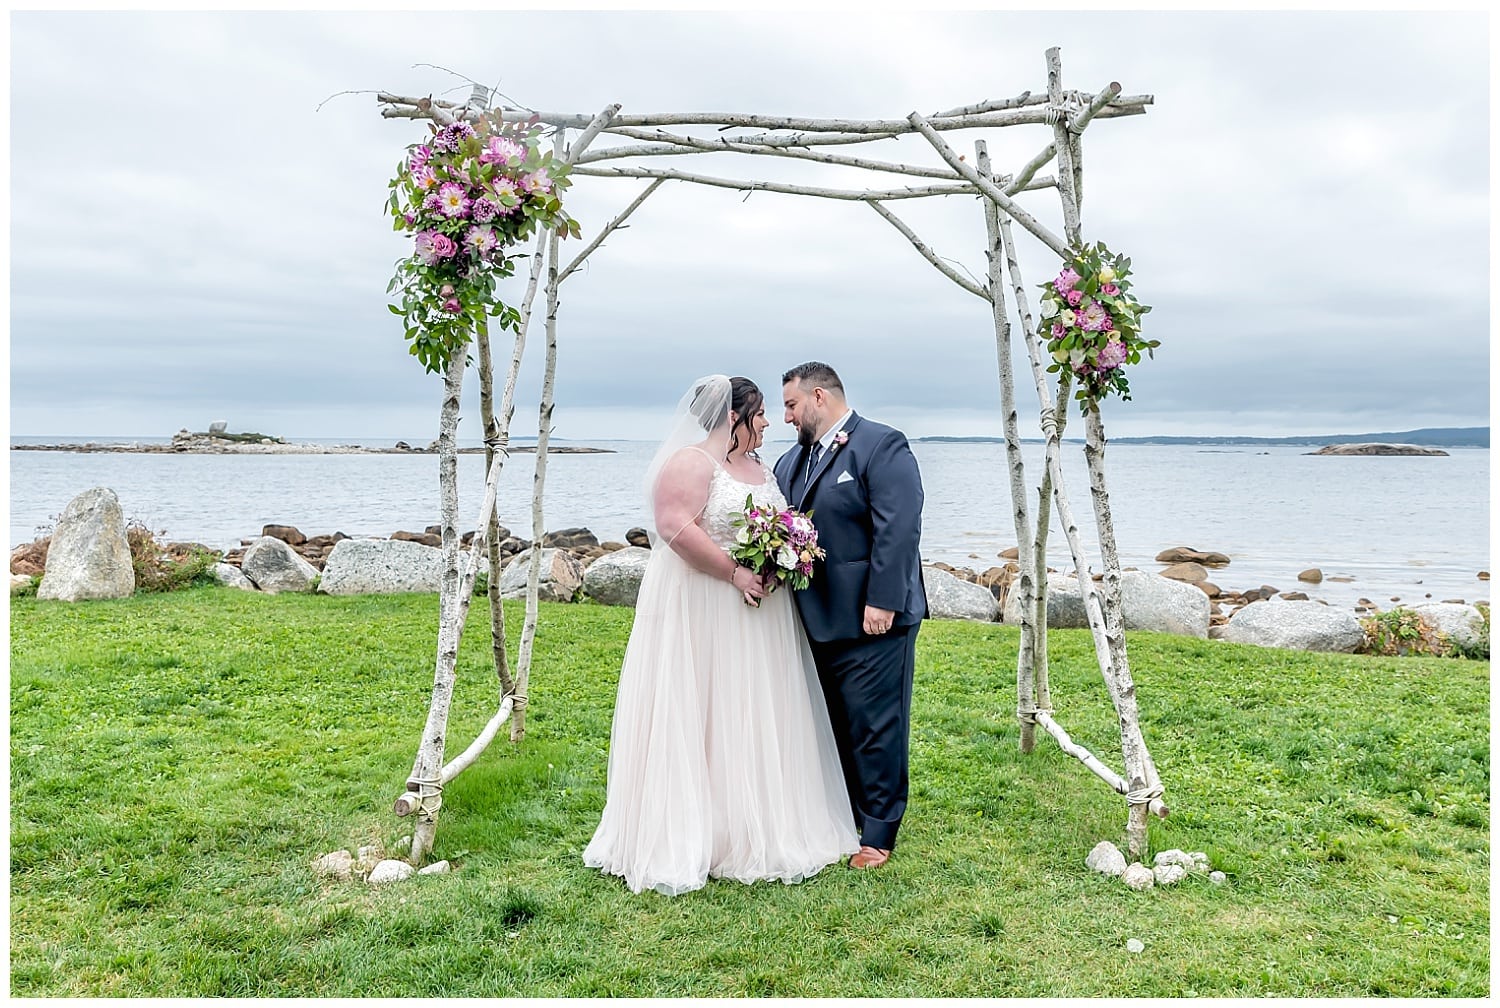 The bride and groom pose under their wedding trellis for photos at the Oceanstone Resort in NS.